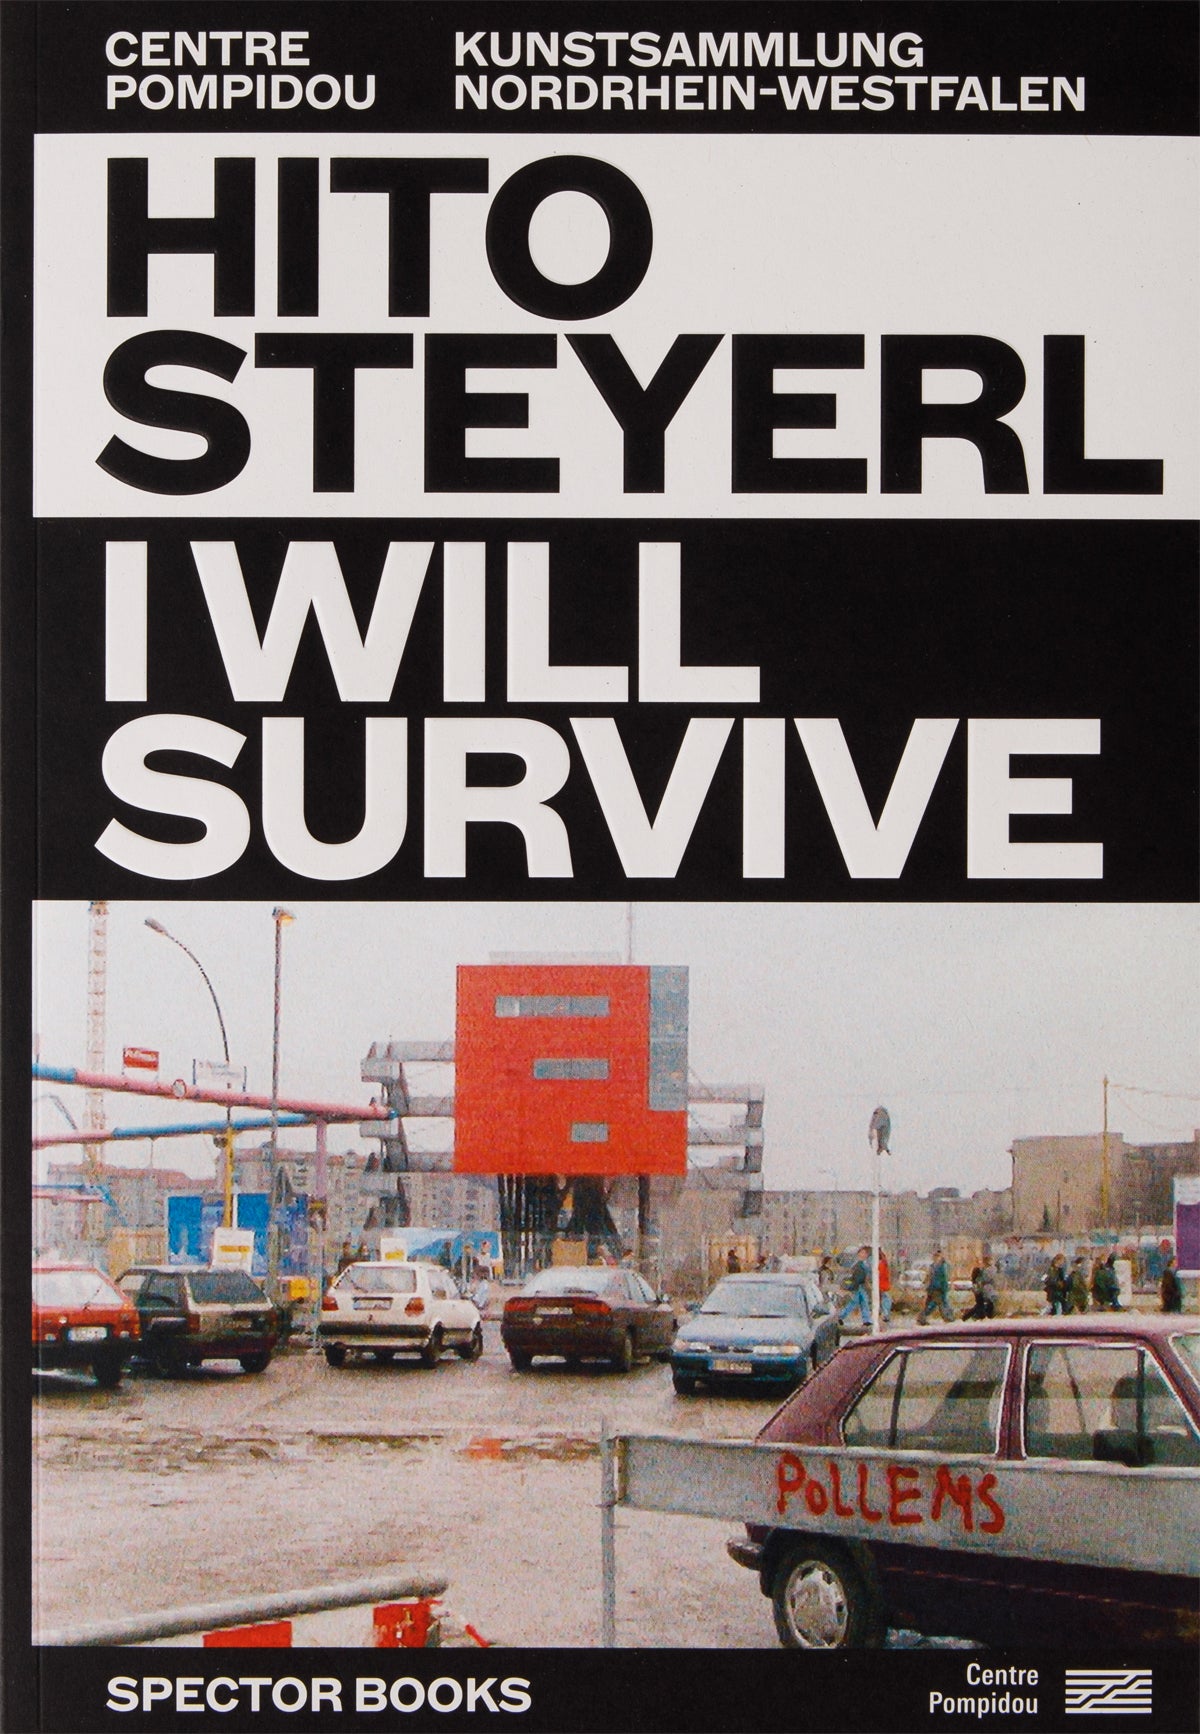 I will survive (English, French)